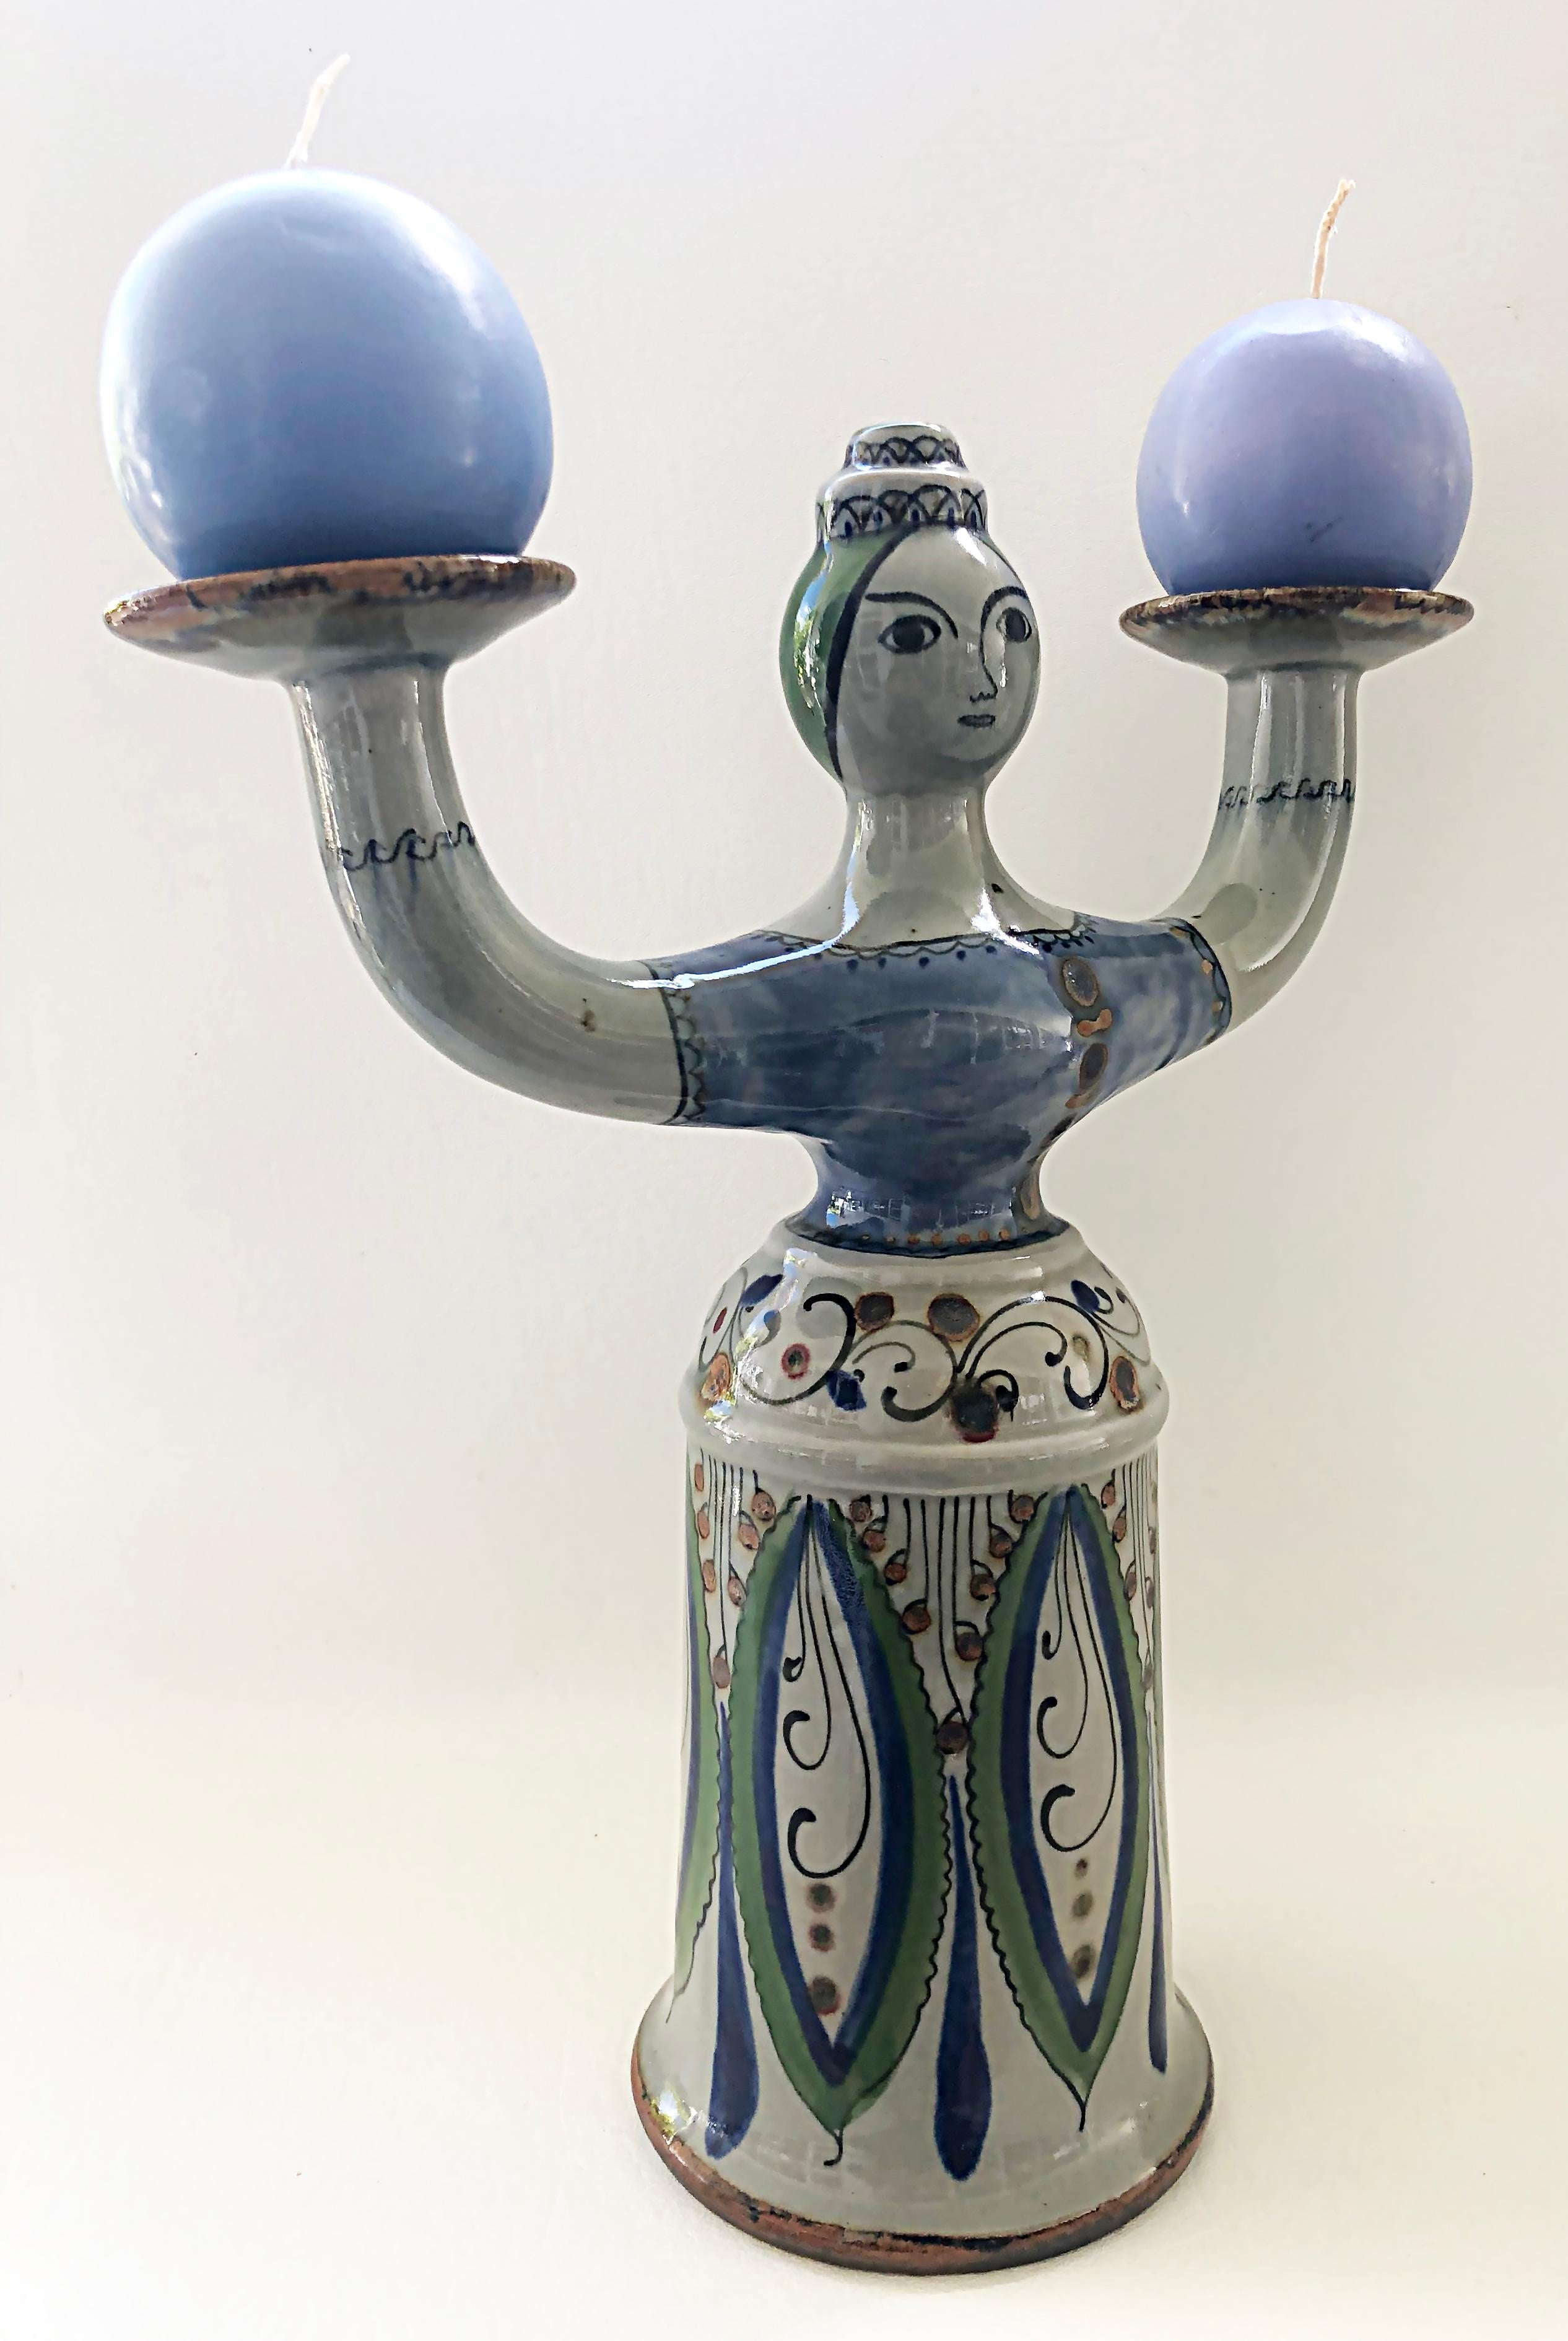 Mexican hand-painted Tonala Pottery 2-arm candelabra, signed.

Offered for sale is a Mexican Tonala pottery two-arm candelabra depicting a woman hand-painted with a typical embroidered dress and outstretched arms which serve as the candleholders.